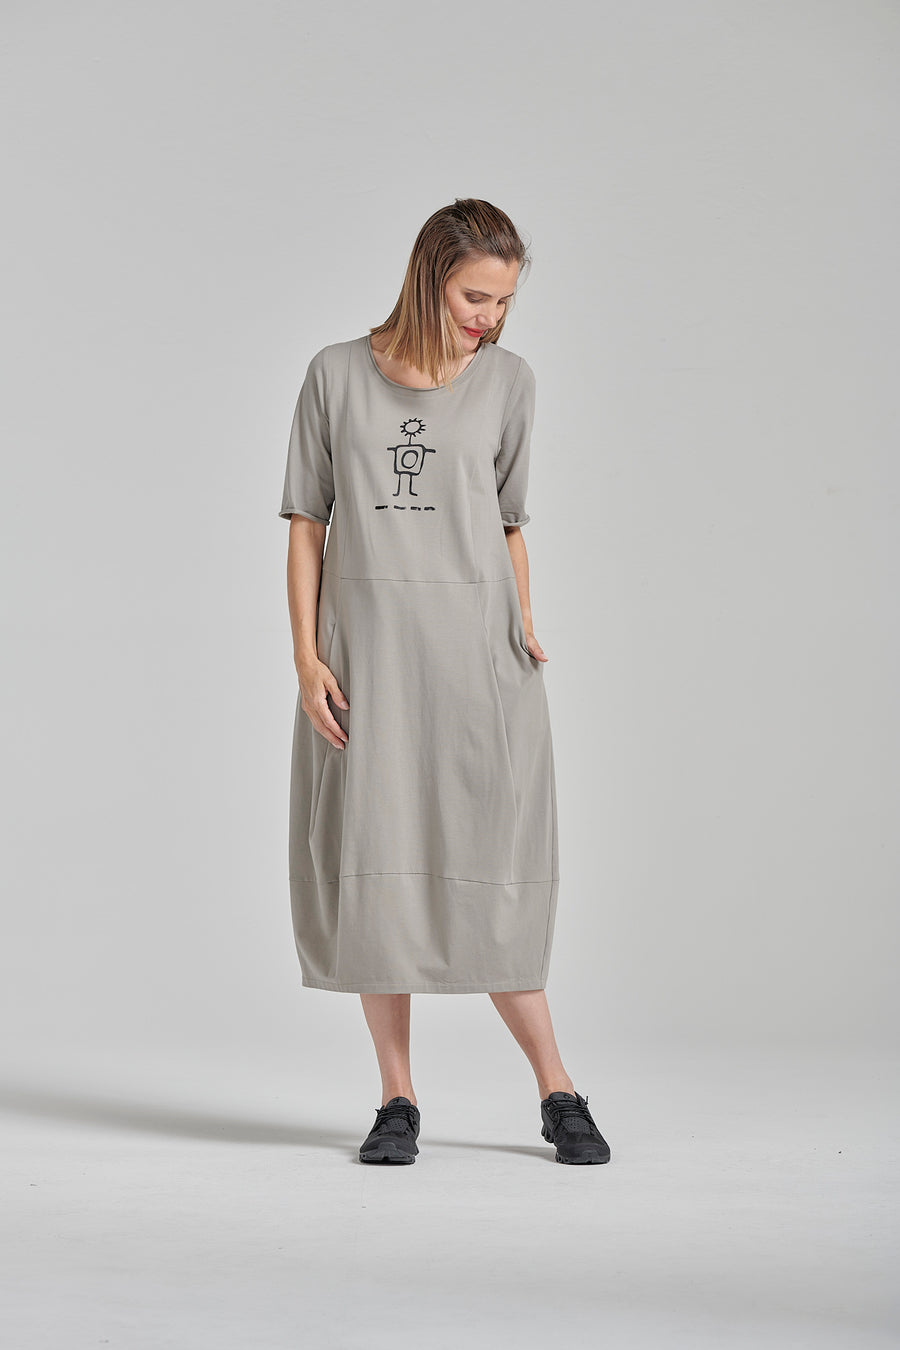 Dress in fine cotton jersey spandex (with or without motif print)